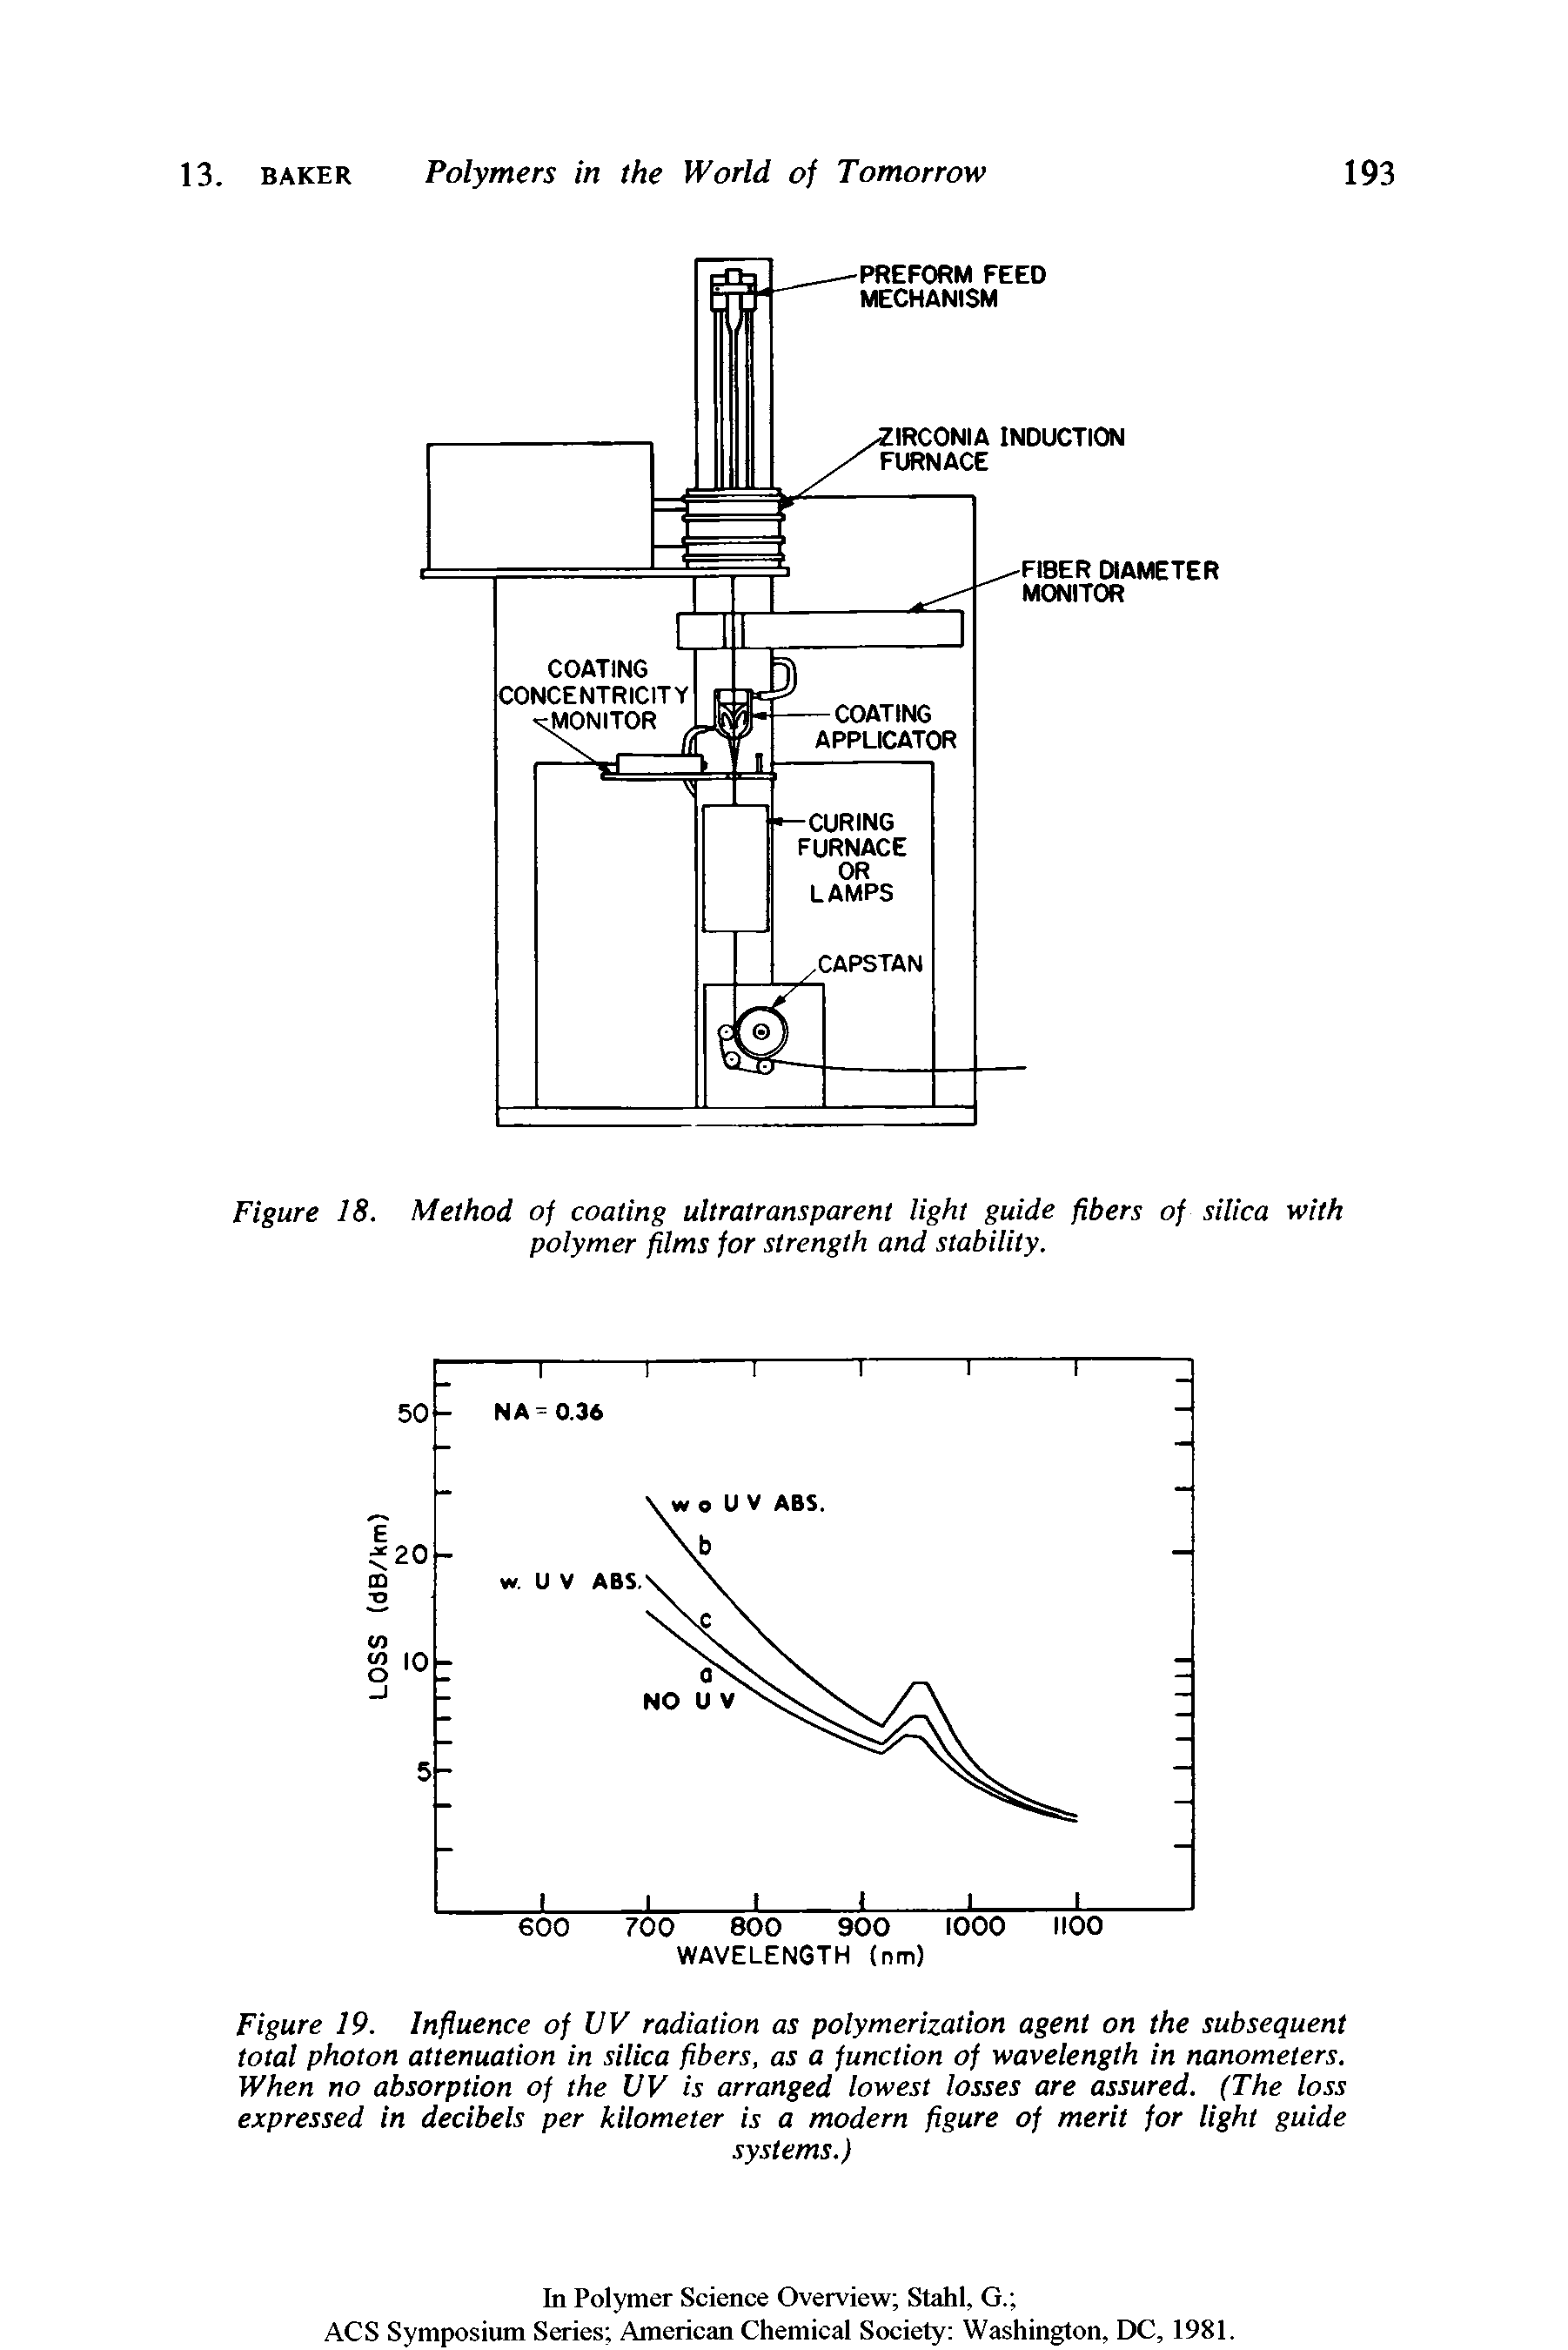 Figure 19. Influence of UV radiation as polymerization agent on the subsequent total photon attenuation in silica fibers, as a function of wavelength in nanometers. When no absorption of the UV is arranged lowest losses are assured. (The loss expressed in decibels per kilometer is a modern figure of merit for light guide...